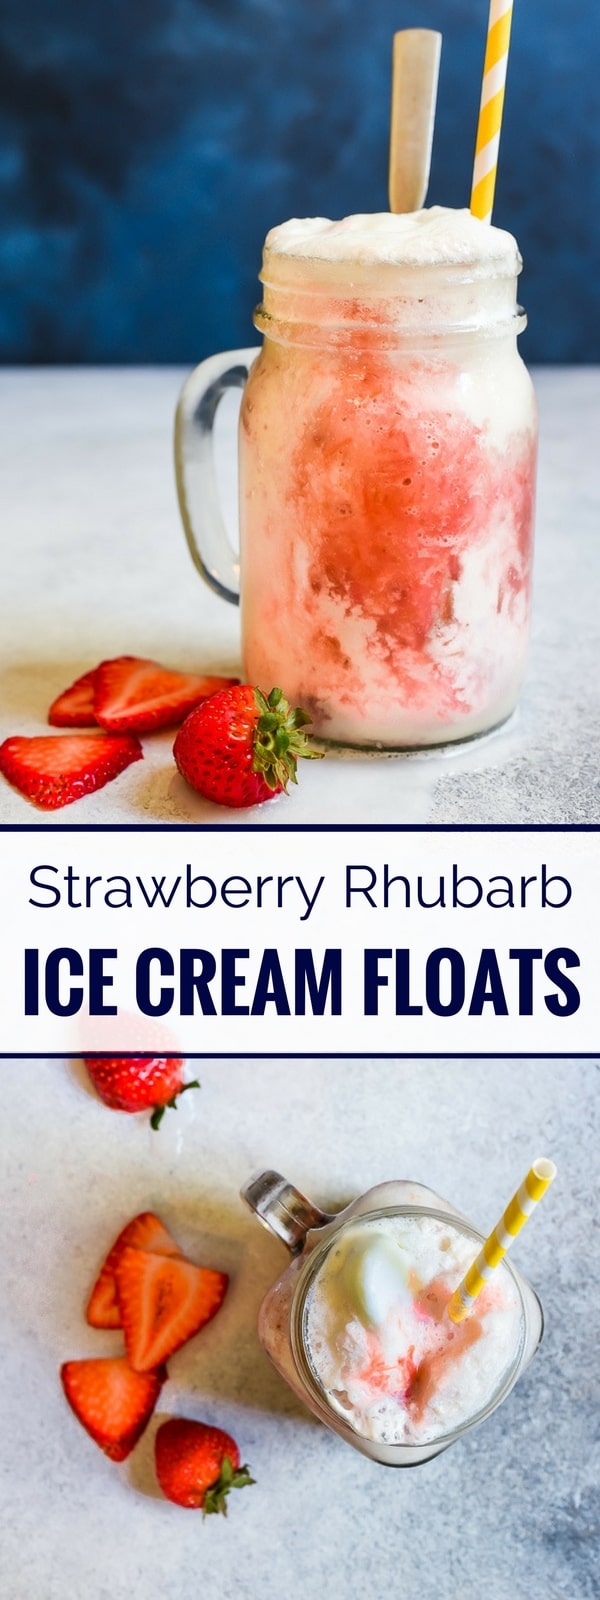 These Strawberry Rhubarb Ice Cream Floats are an easy, refreshing dessert perfect for all your summer parties!